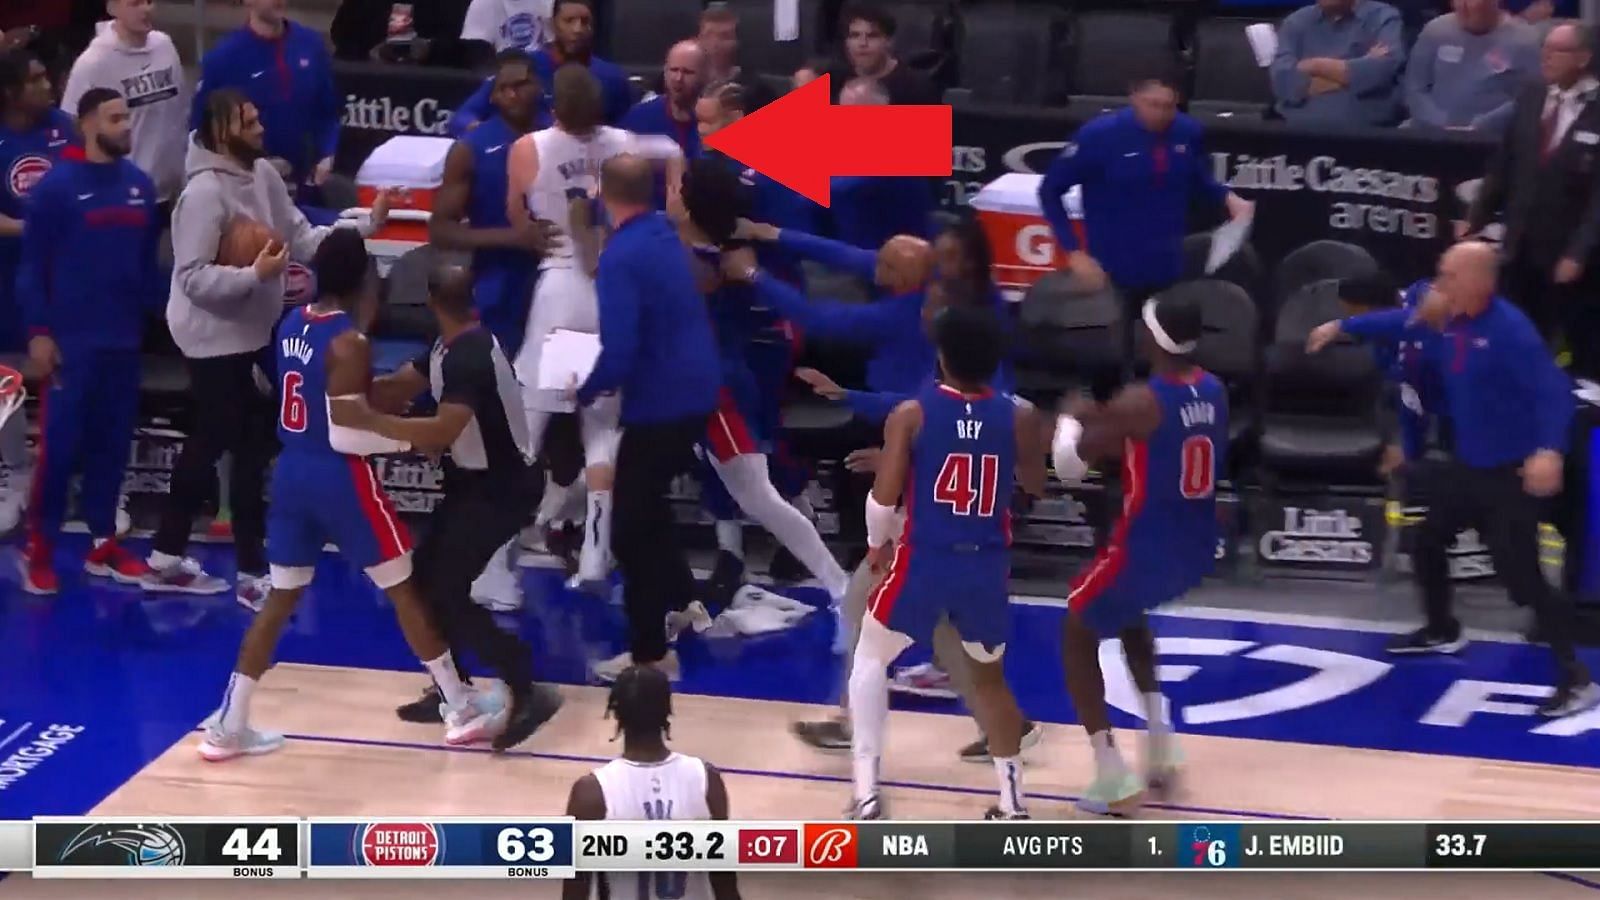 An ugly scuffle broke out between Moe Wagner of the Orlando Magic and Killian Hayes of the Detroit Pistons.